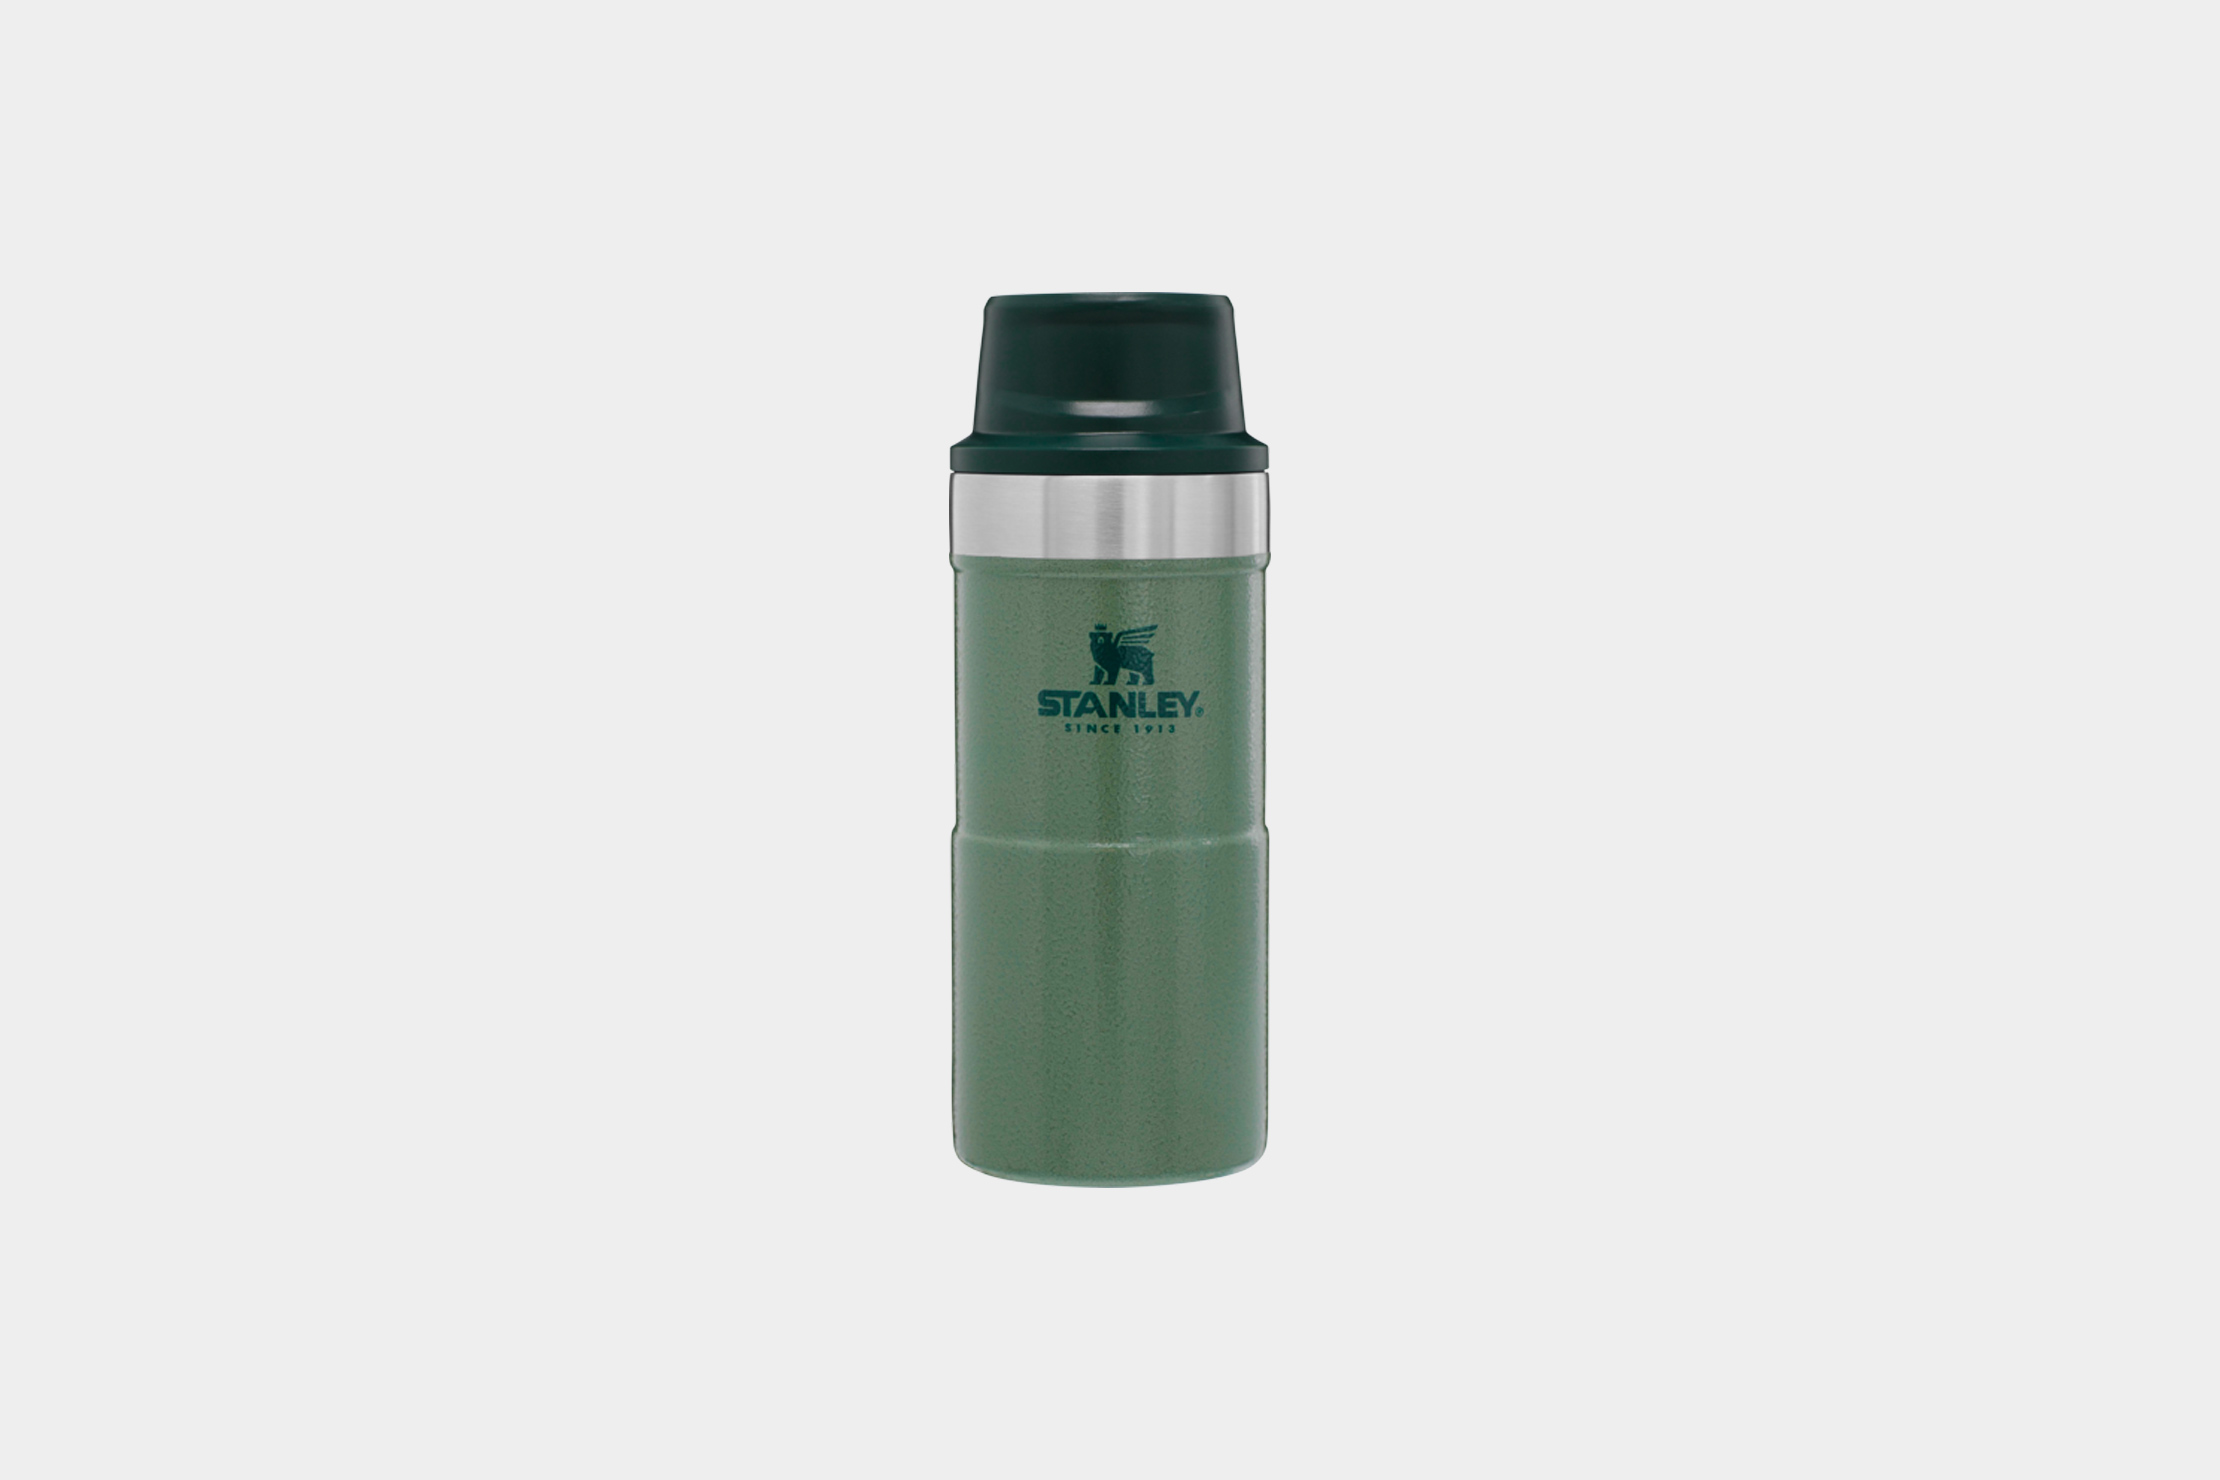 Stanley 12 oz Classic Trigger-Action Insulated Stainless Steel Travel Mug 